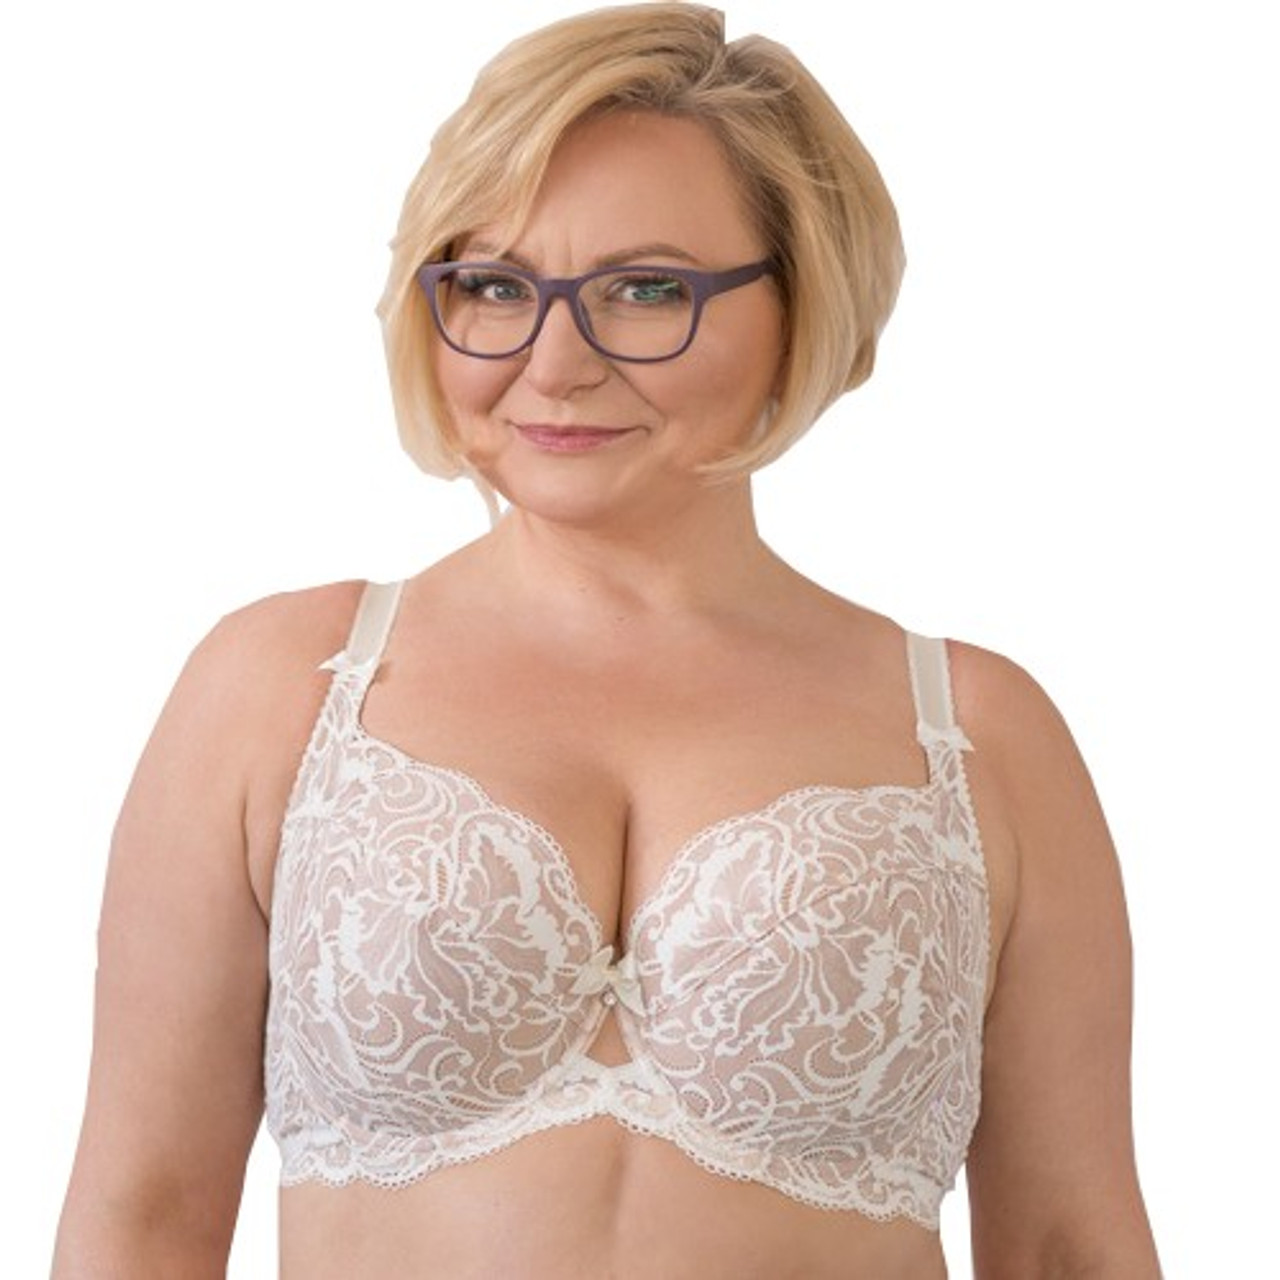 darline alonso recommends Milf Push Up Bra